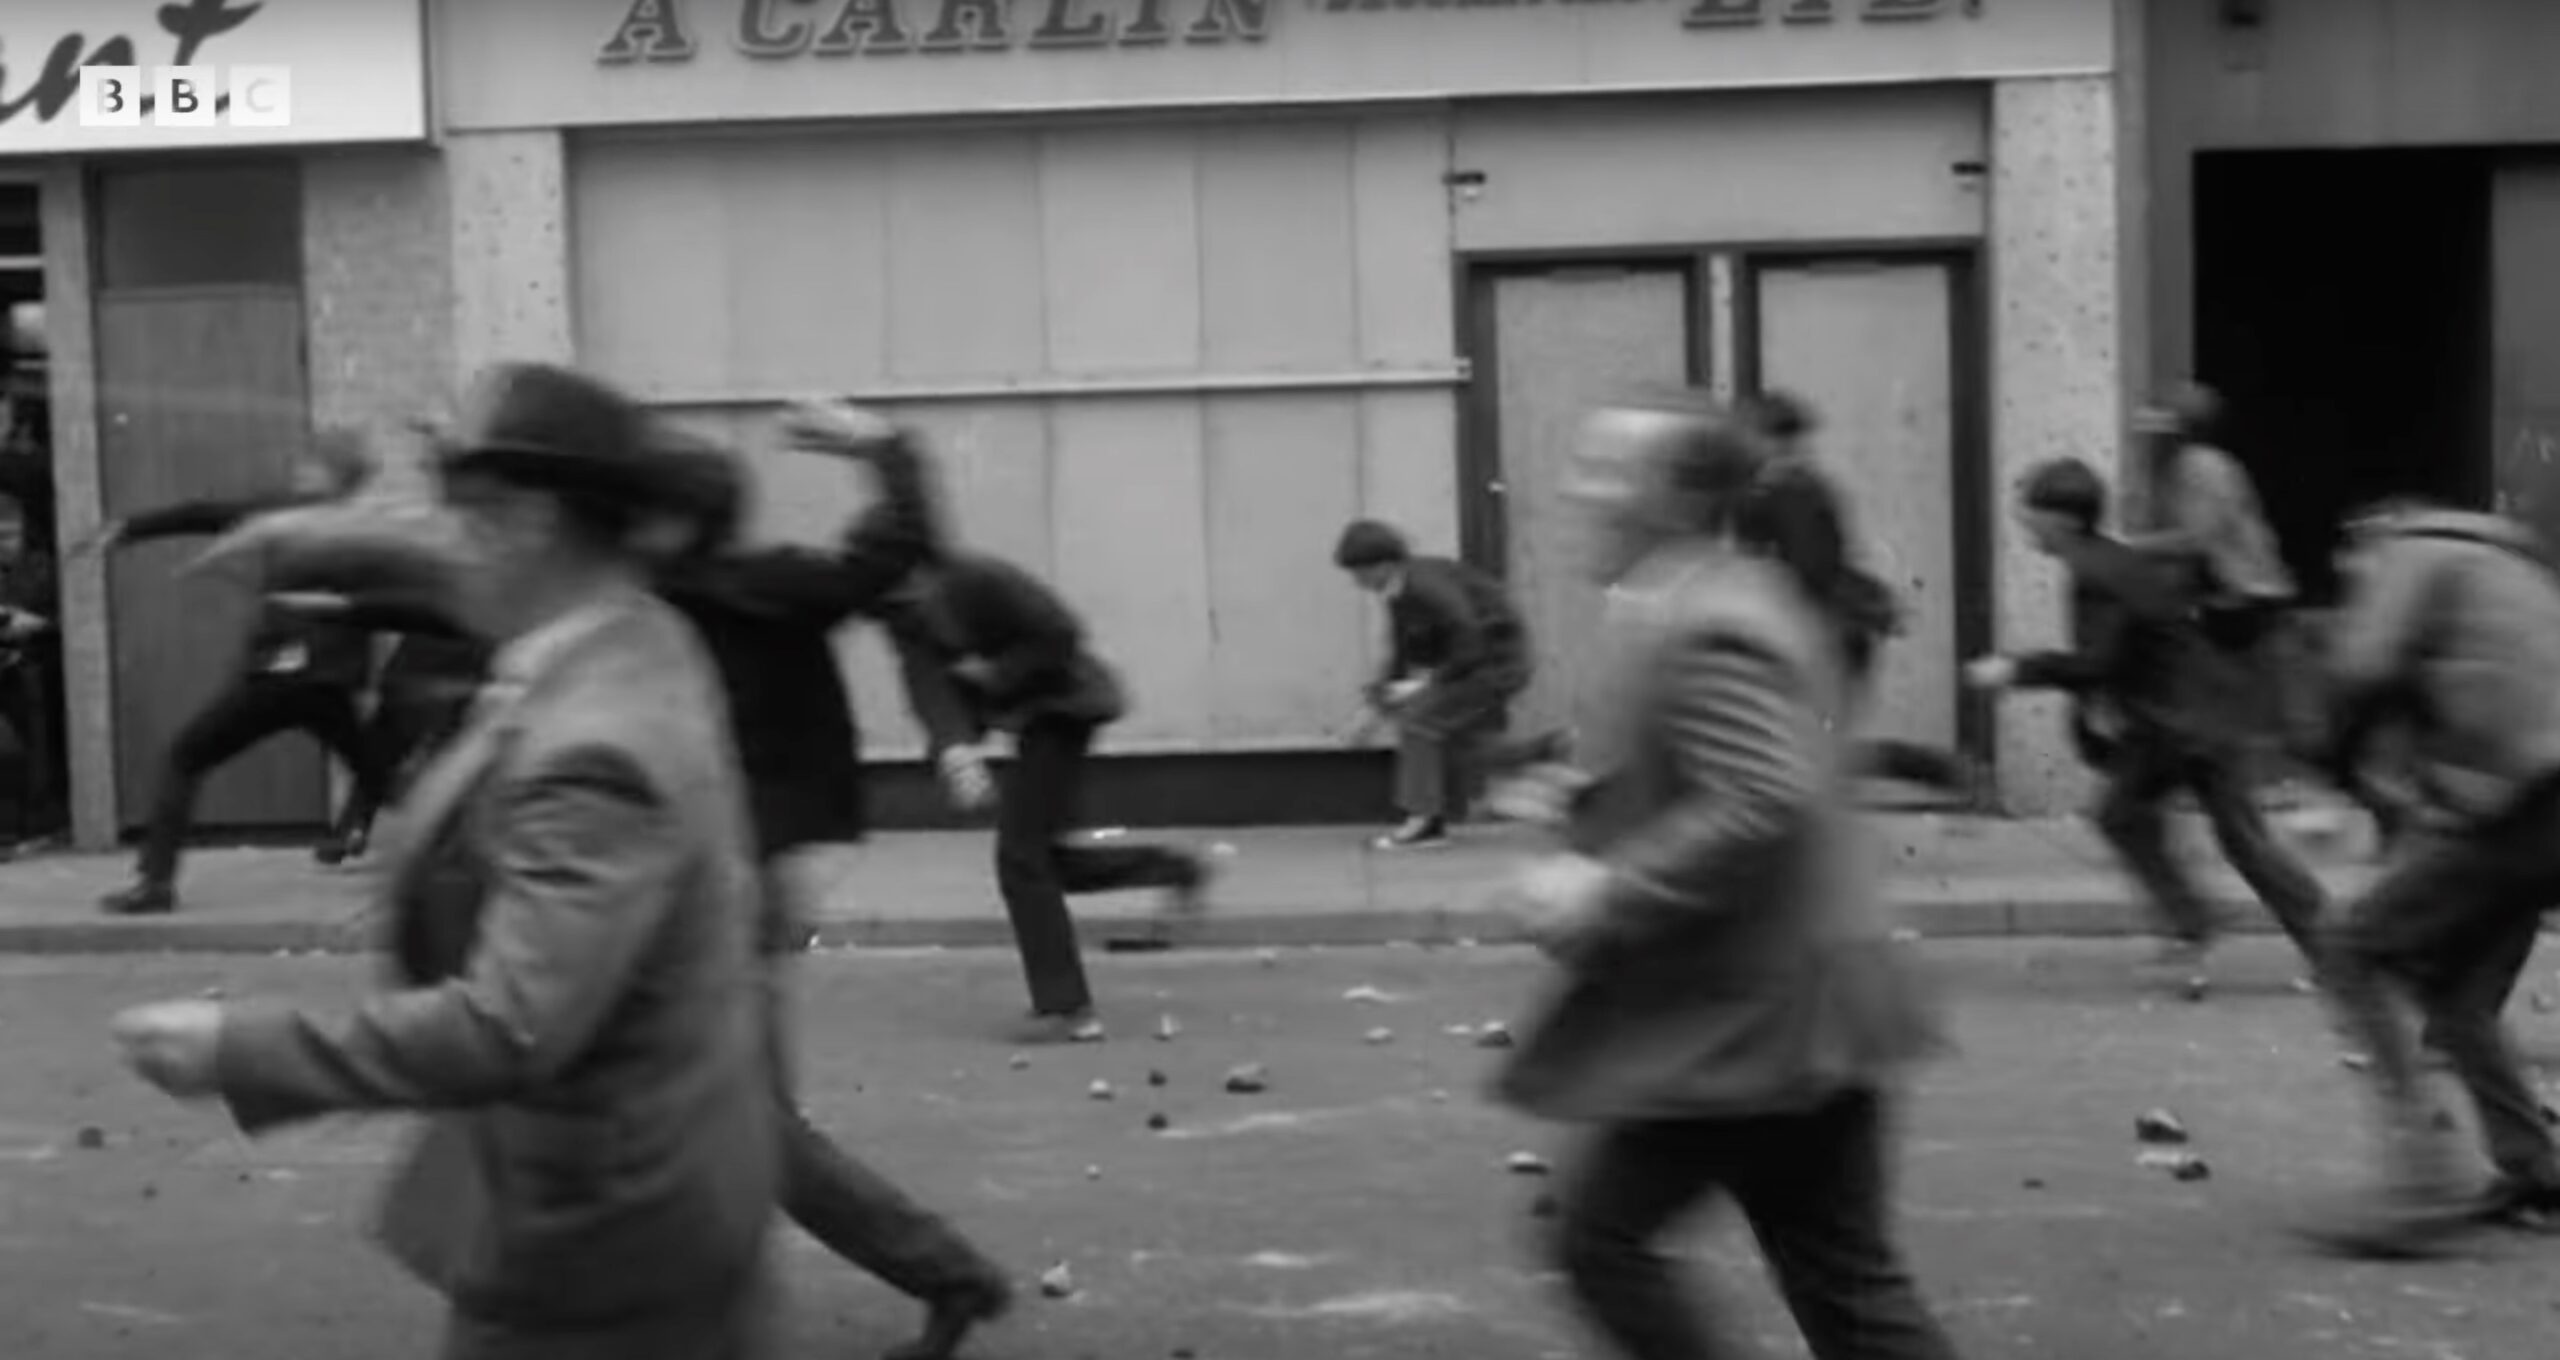 New film on Northern Ireland’s ‘Troubles’ cautions against political violence.